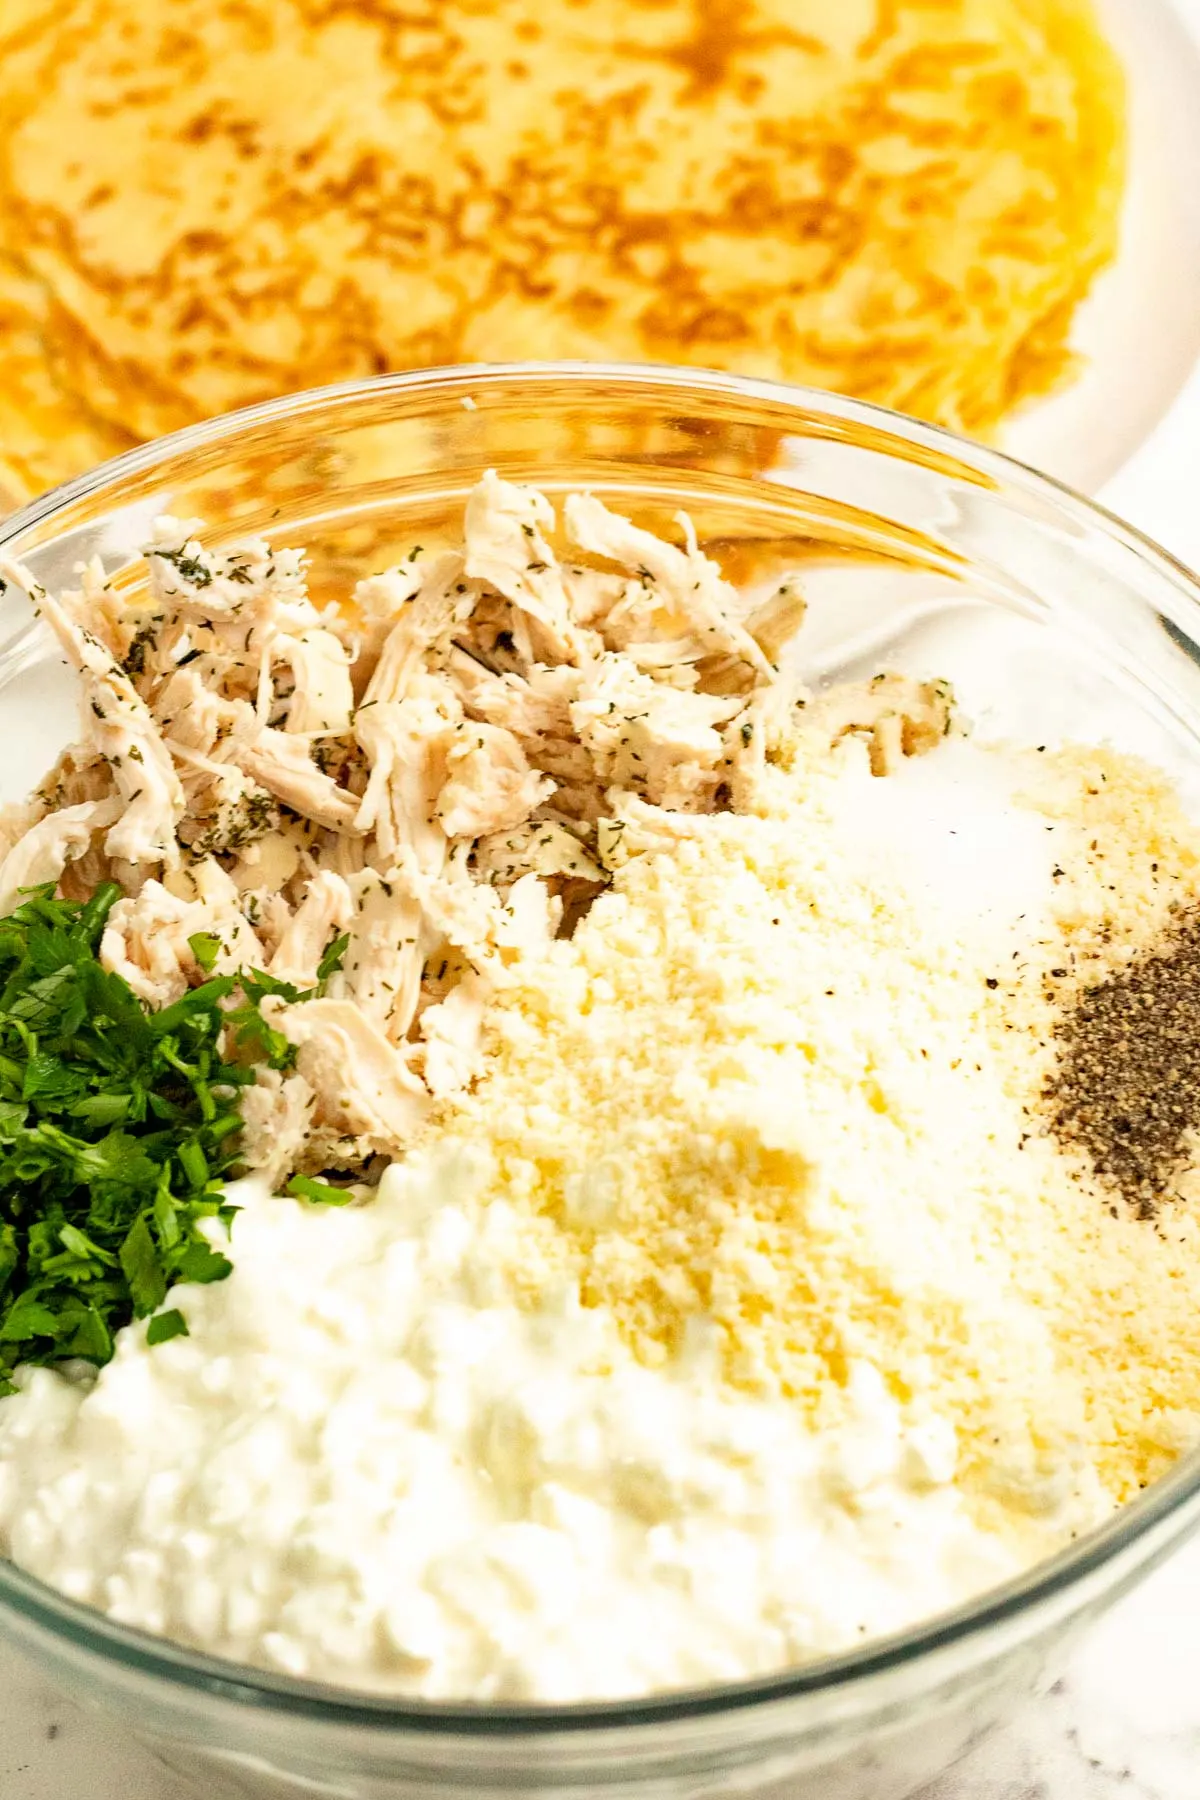 Savory chicken crepe filling ingredients in a bowl.